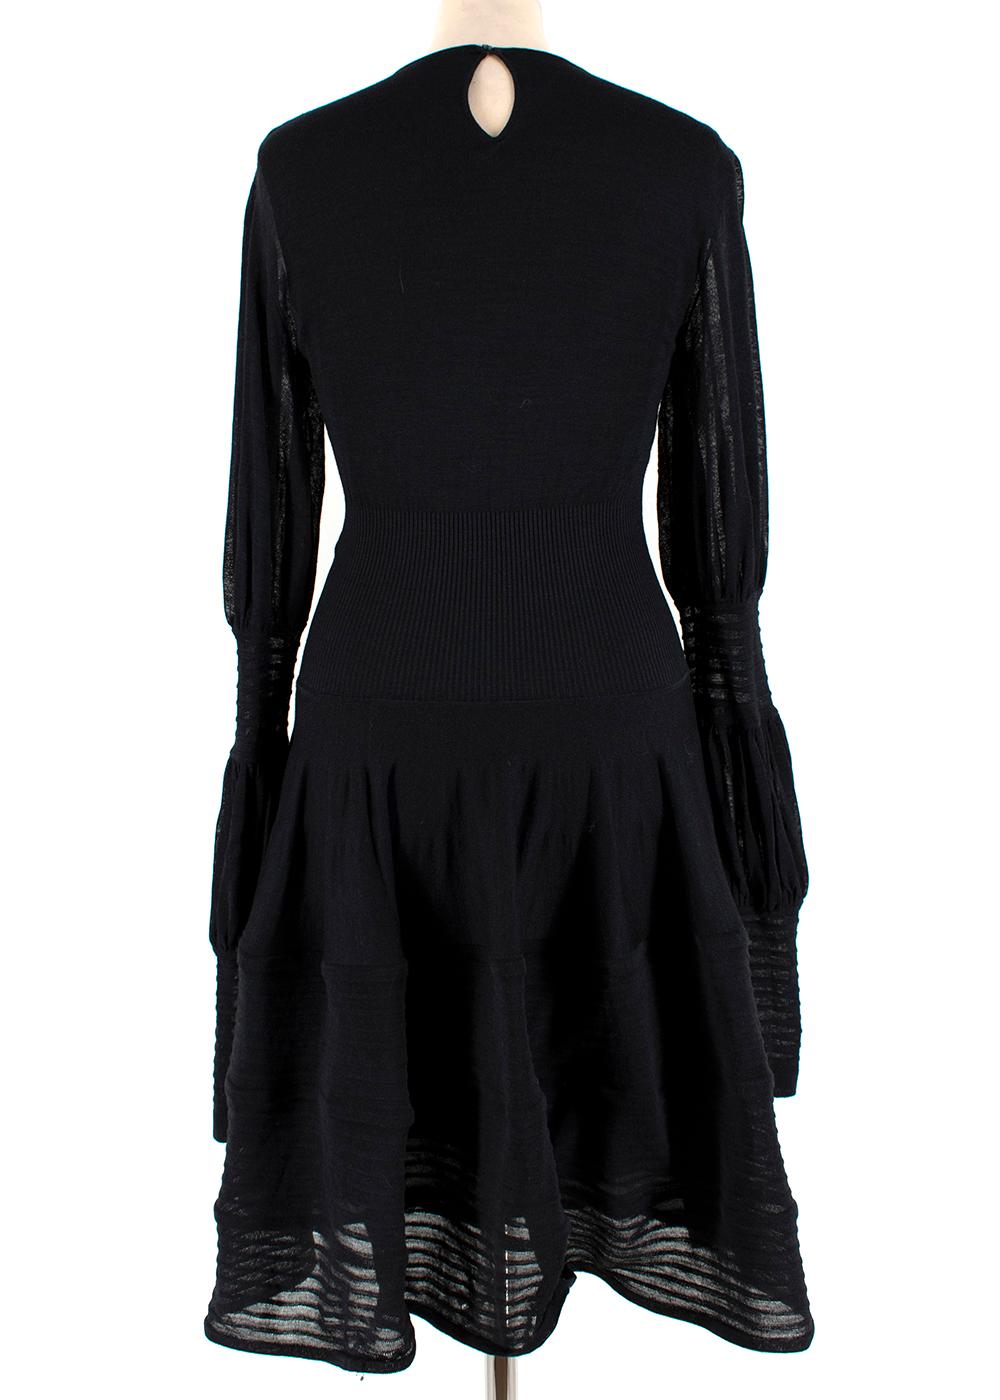 Alexander McQueen Black Ribbed Silk Dress

- Ribbed detail dress
- Cuffed sleeves 
- Button fastening
- Lined hem 
- Silk slip 
- Fitted style 
- Size M 

Dry Clean Only 
Measurements are taken with the item lying flat, seam to seam.
Shoulders -